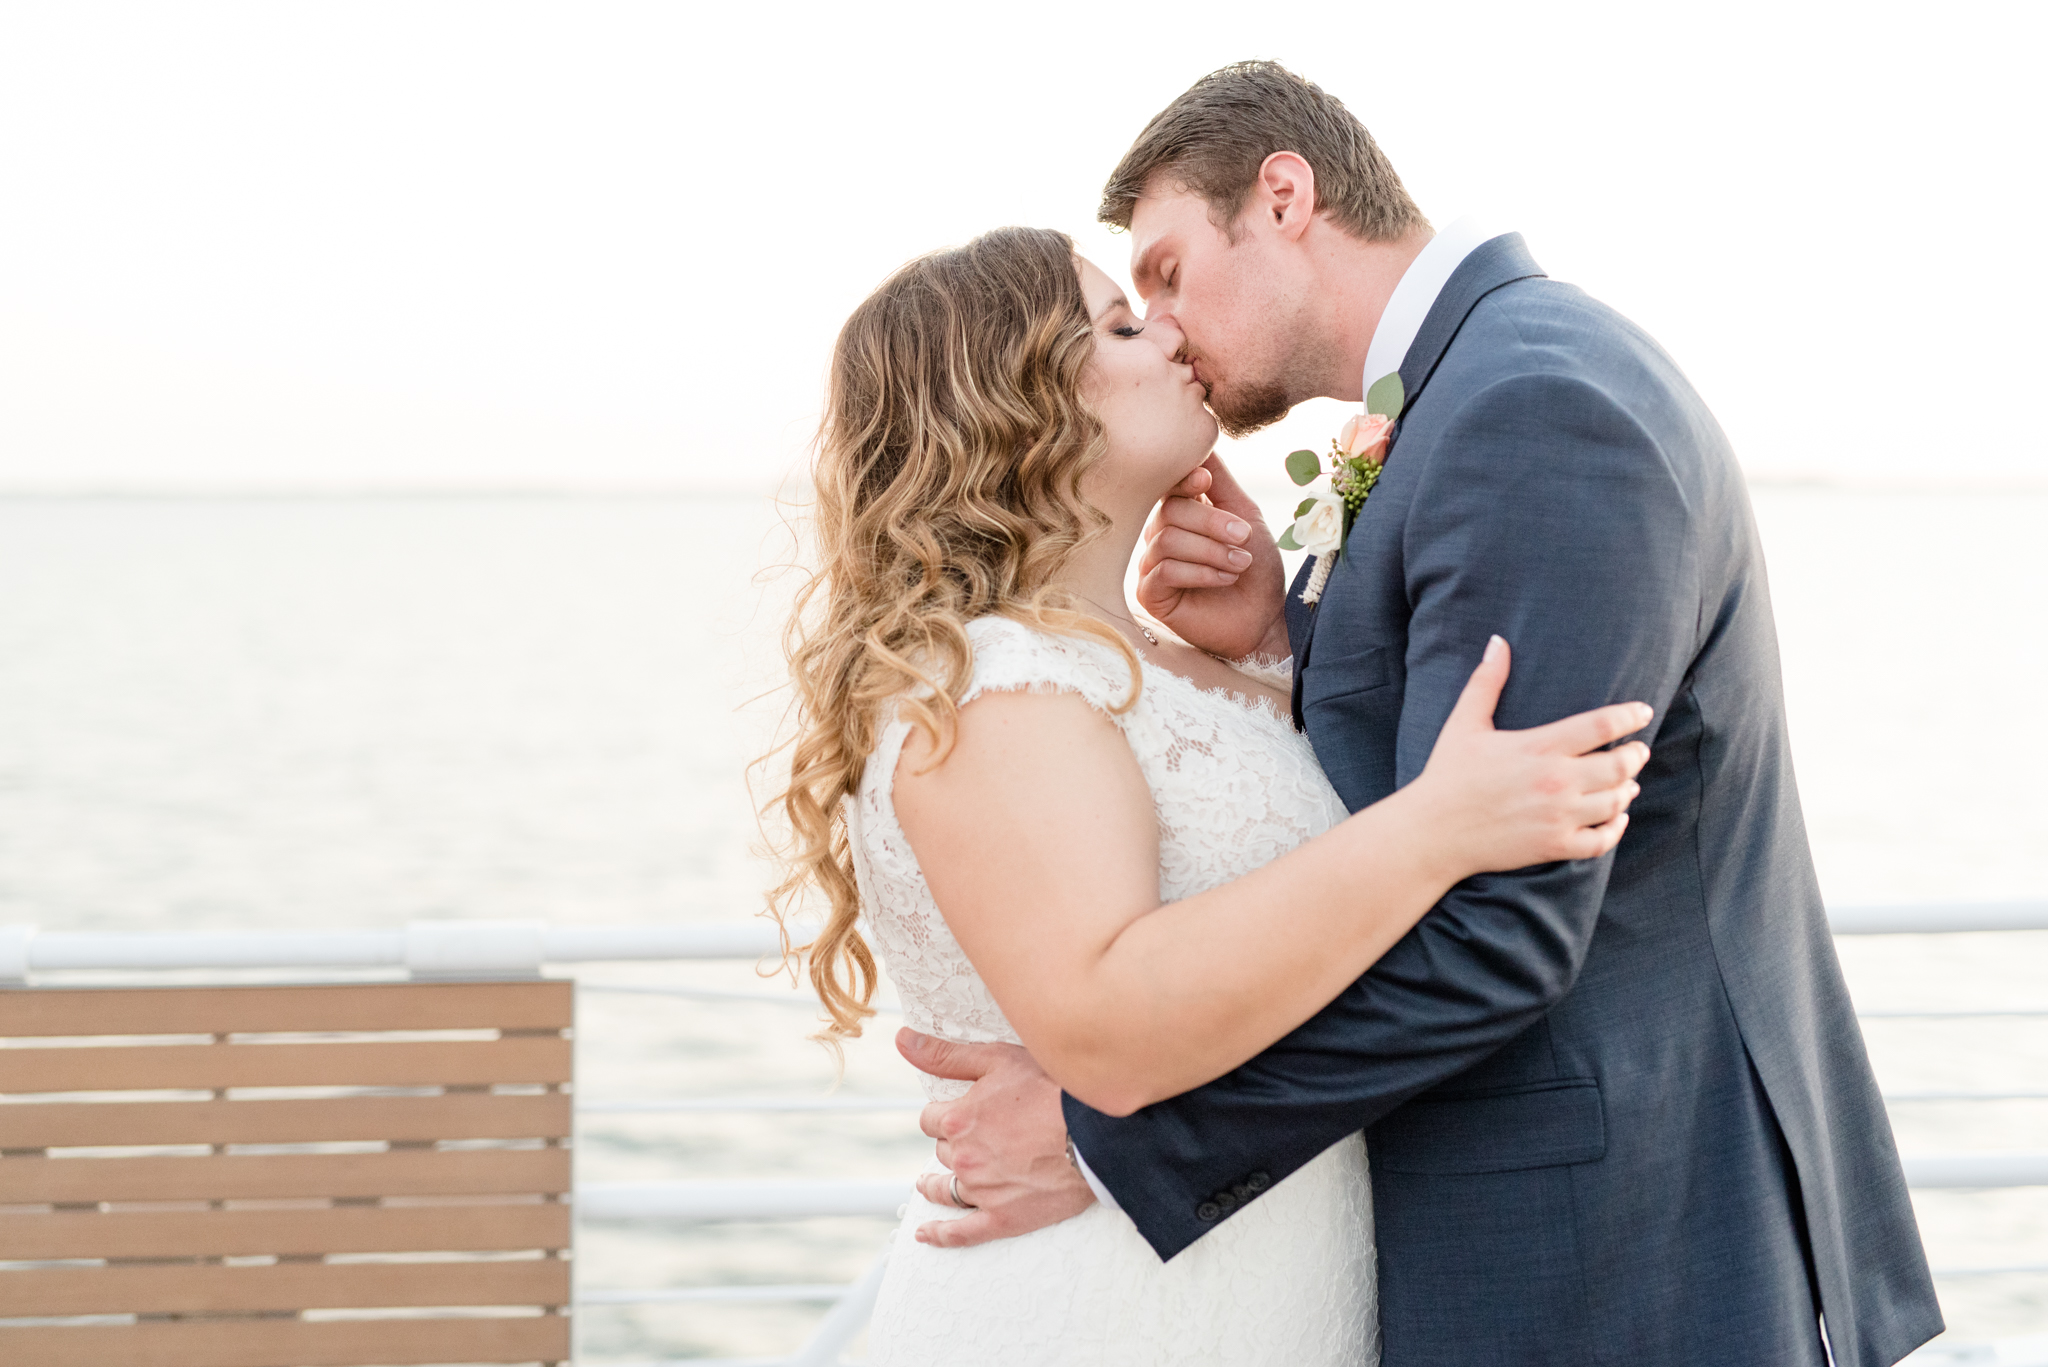 Groom pulls bride in for kiss on yacht.